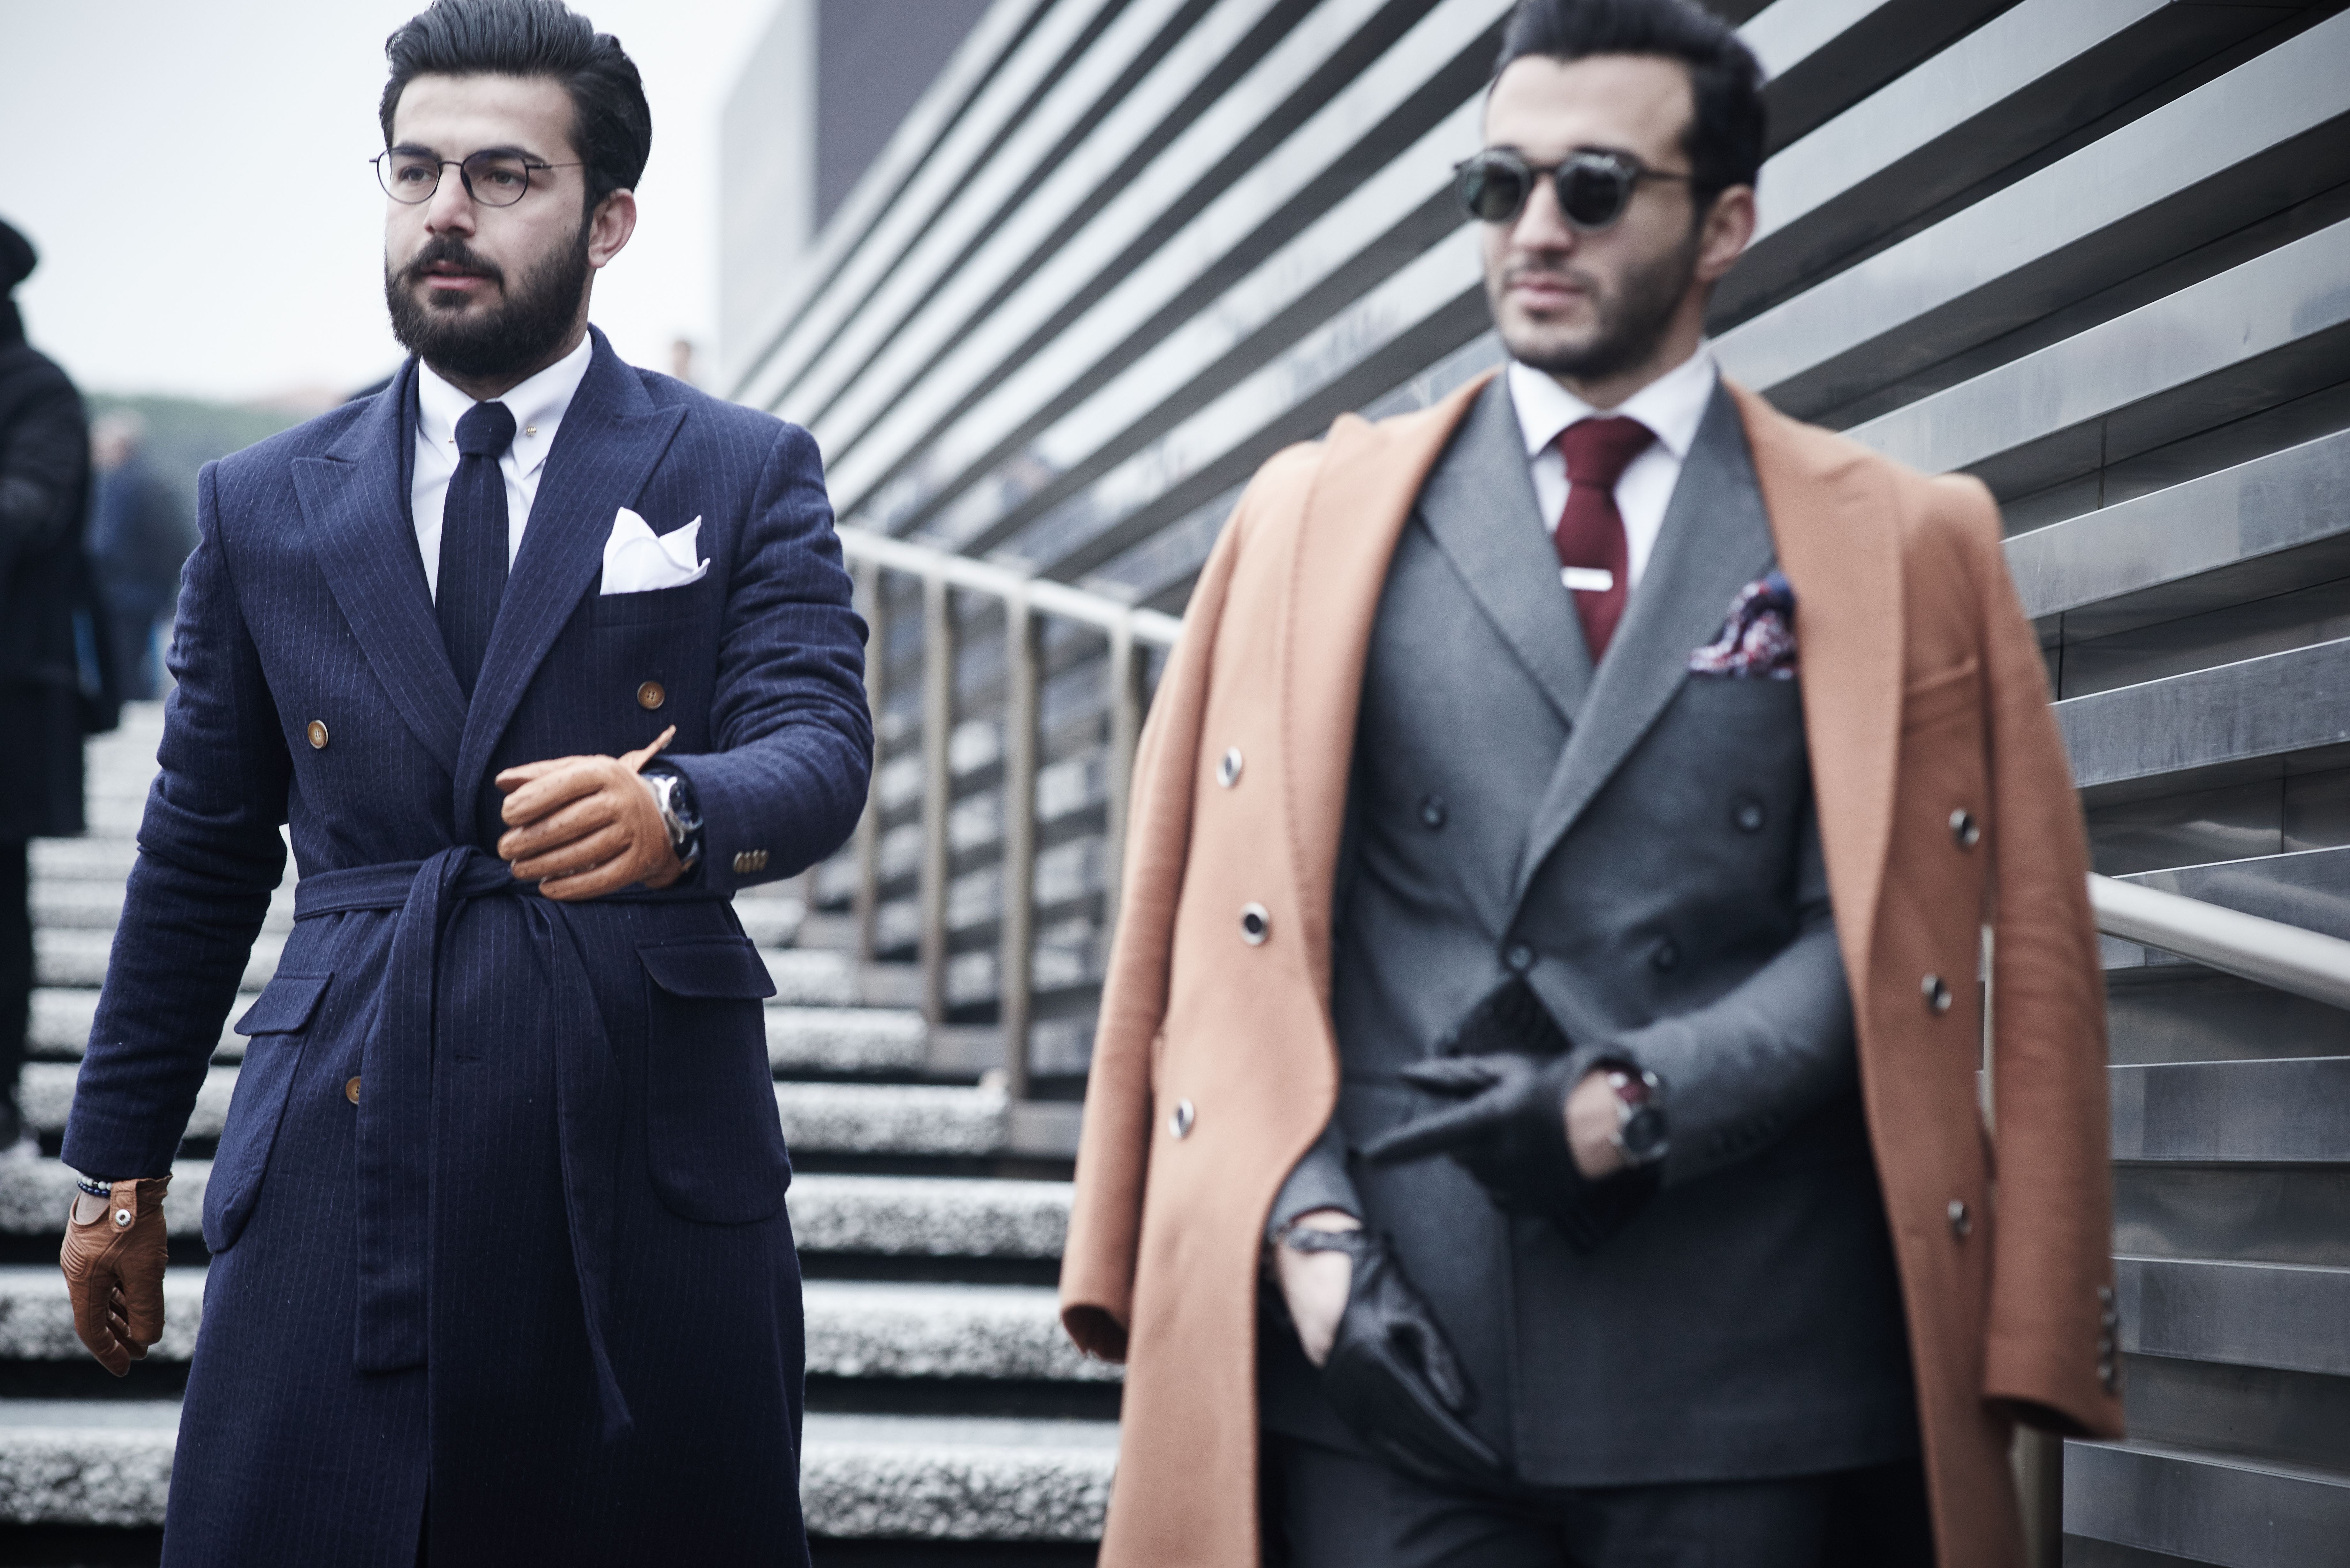 The Best Eyewear Street Style Spotted at Pitti Uomo 2017